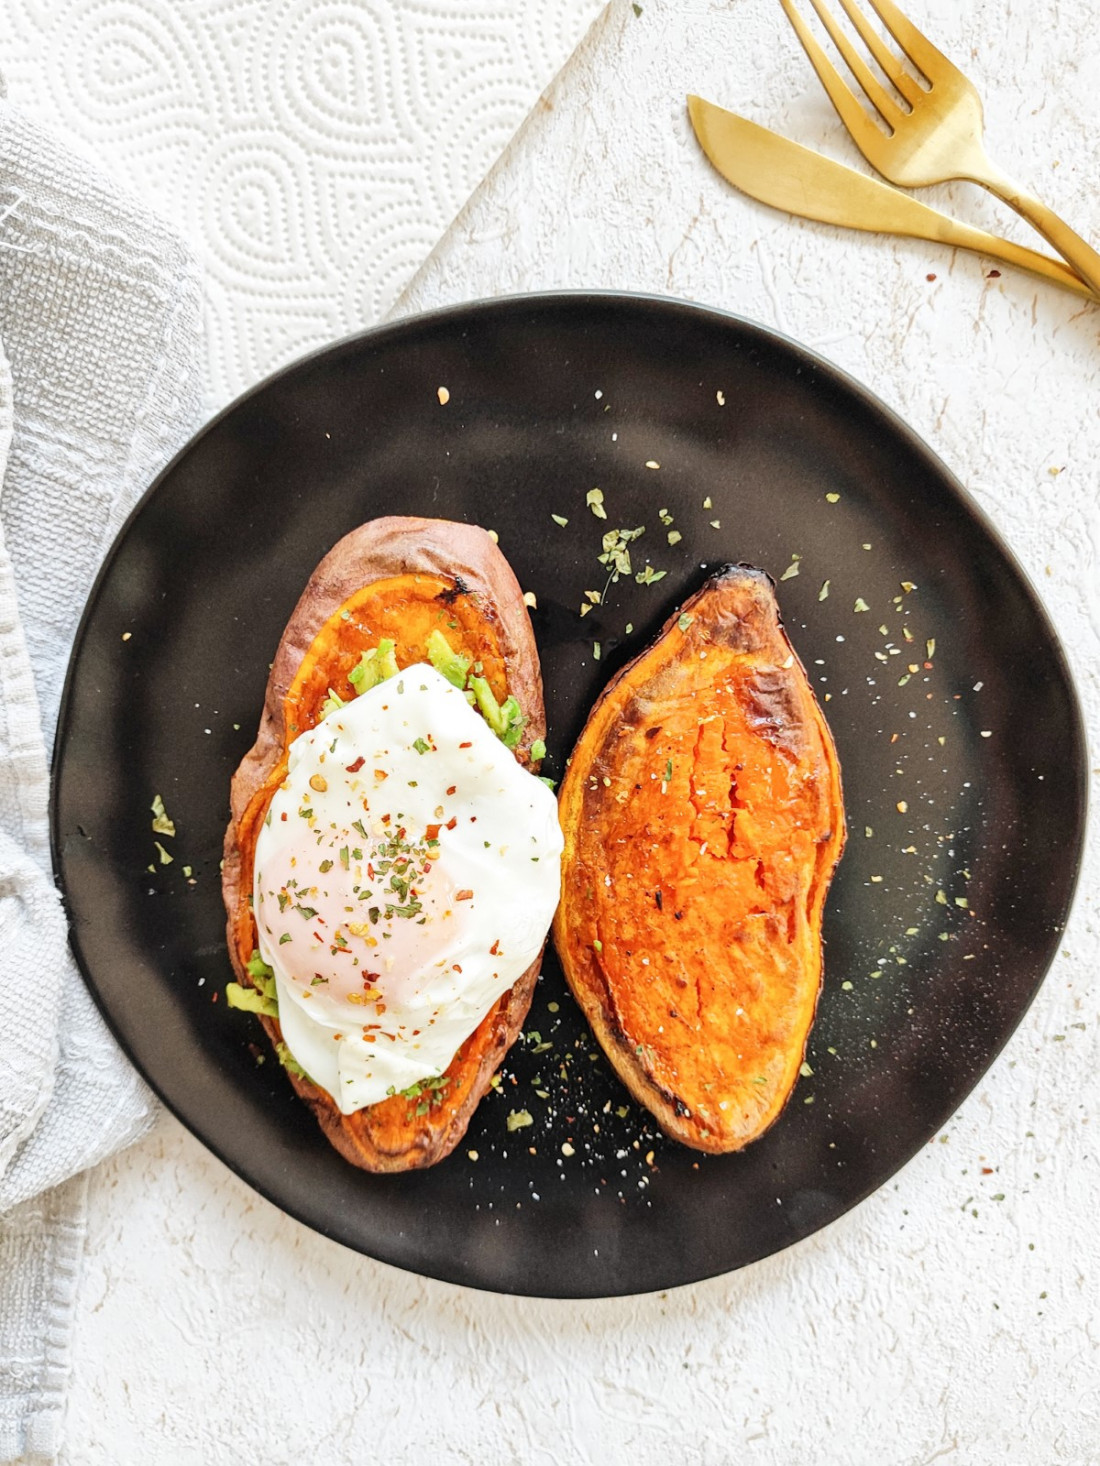 From a Pot - Sweet Potato with Avocado and Egg